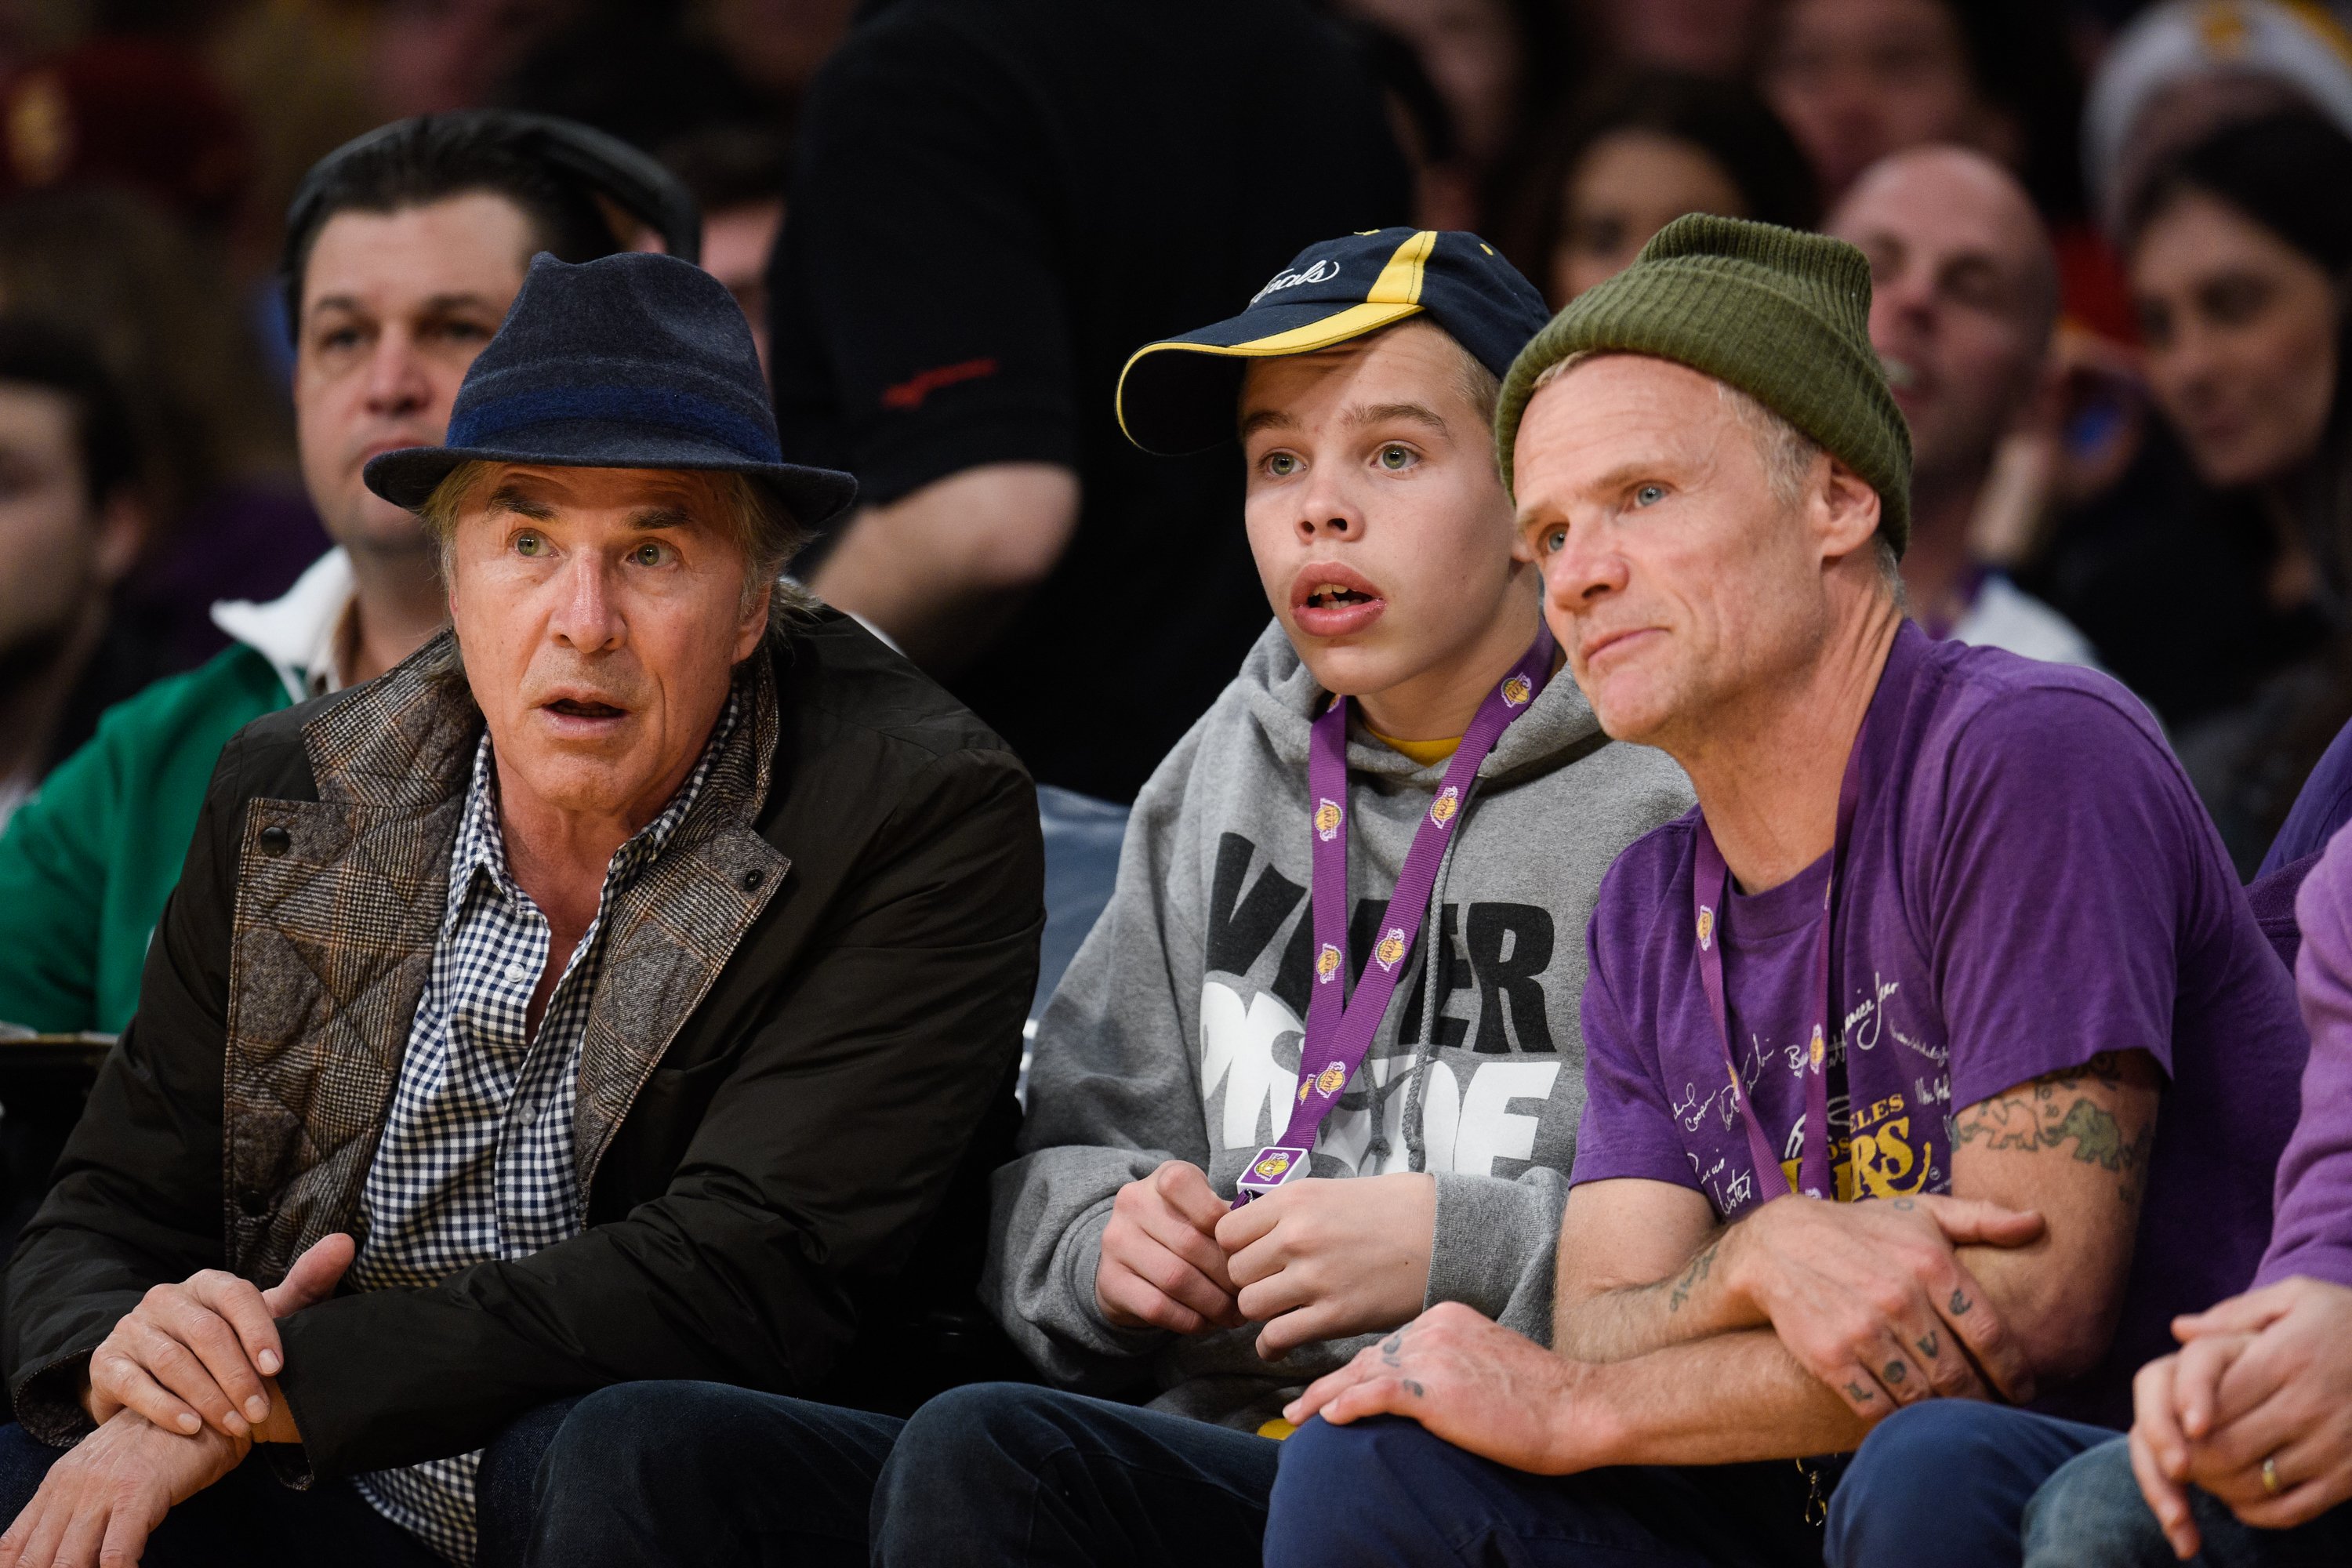 Don Johnson and his son Jasper Breckenridge Johnson attend a basketball between Philadelphia 76ers and the Los Angeles Lakers at Staples Center on January 1, 2016, in Los Angeles, California. | Source: Getty Images